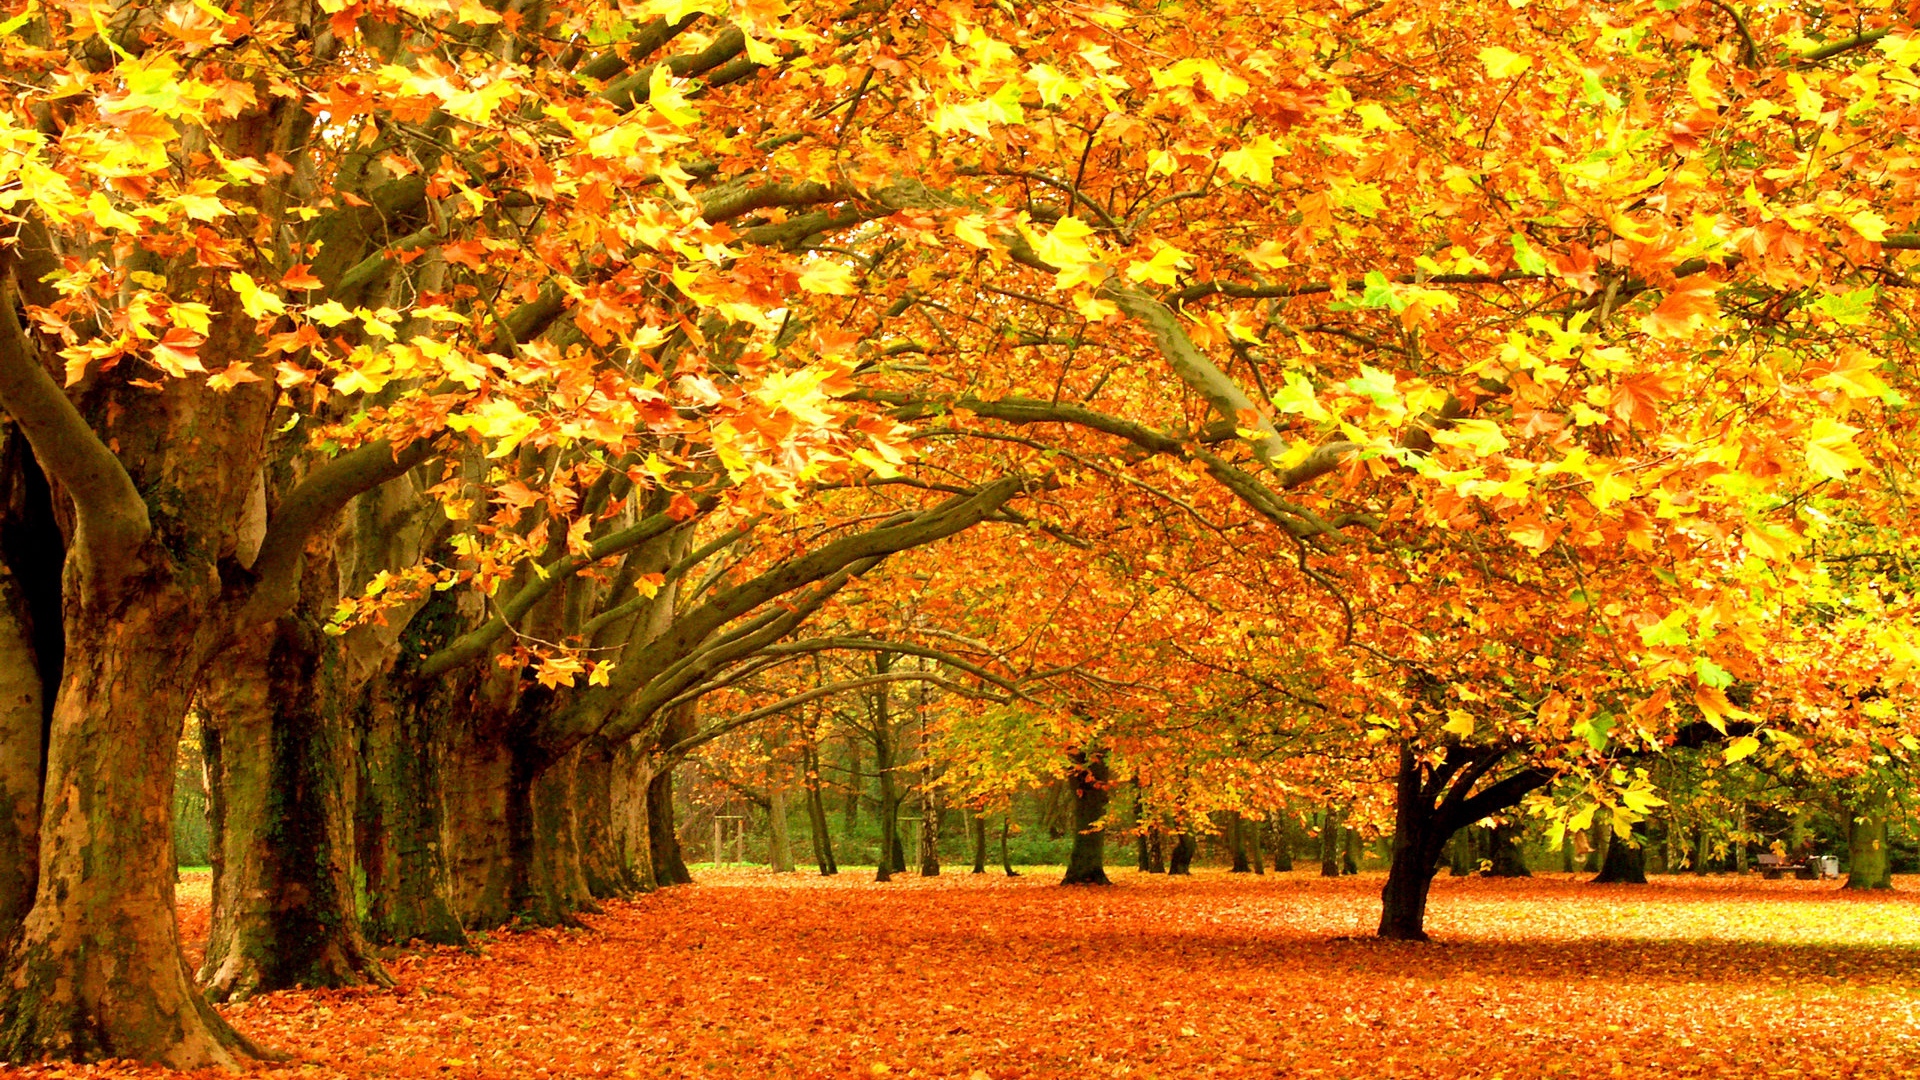 Park Autumn Trees and Foliage Wallpaper